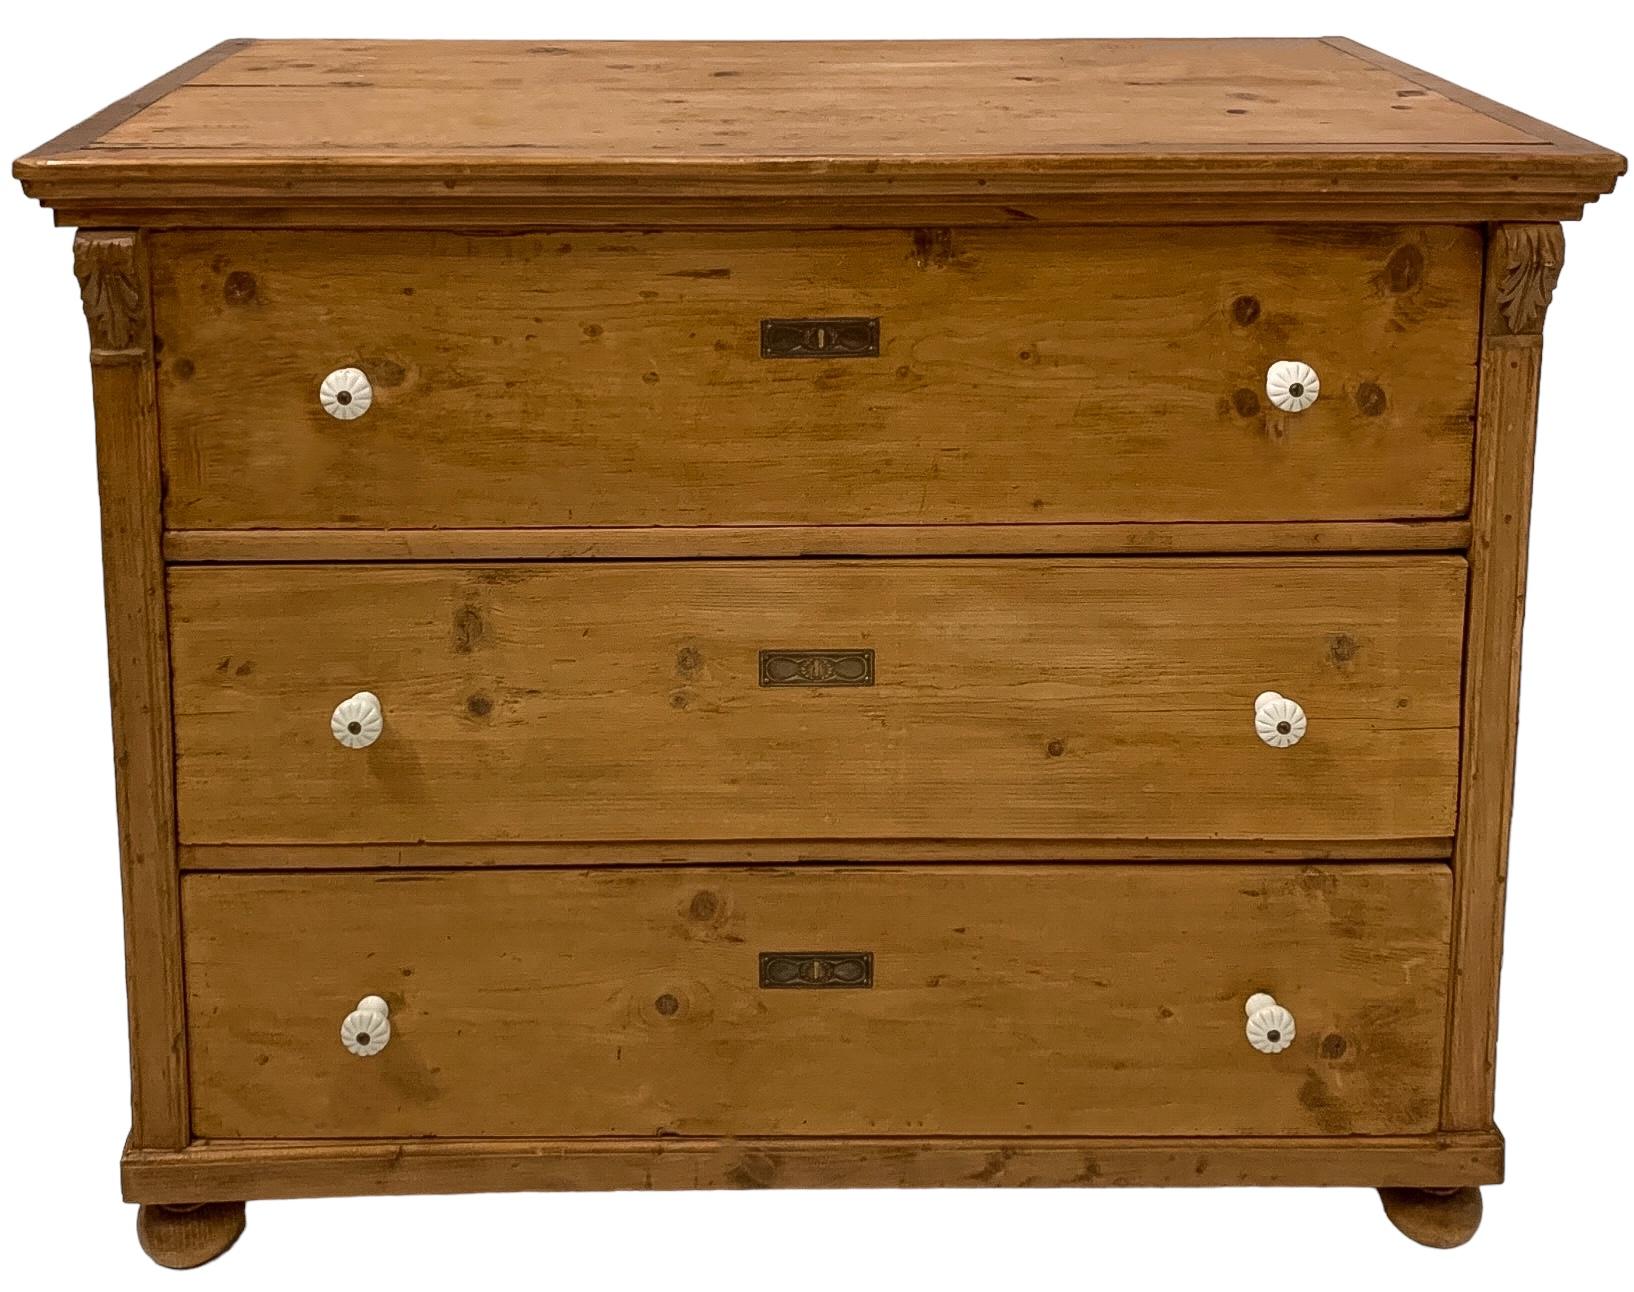 19th-C. Rustic English Country Pine Chest / Commode W / Porcelain Knobs For Sale 2